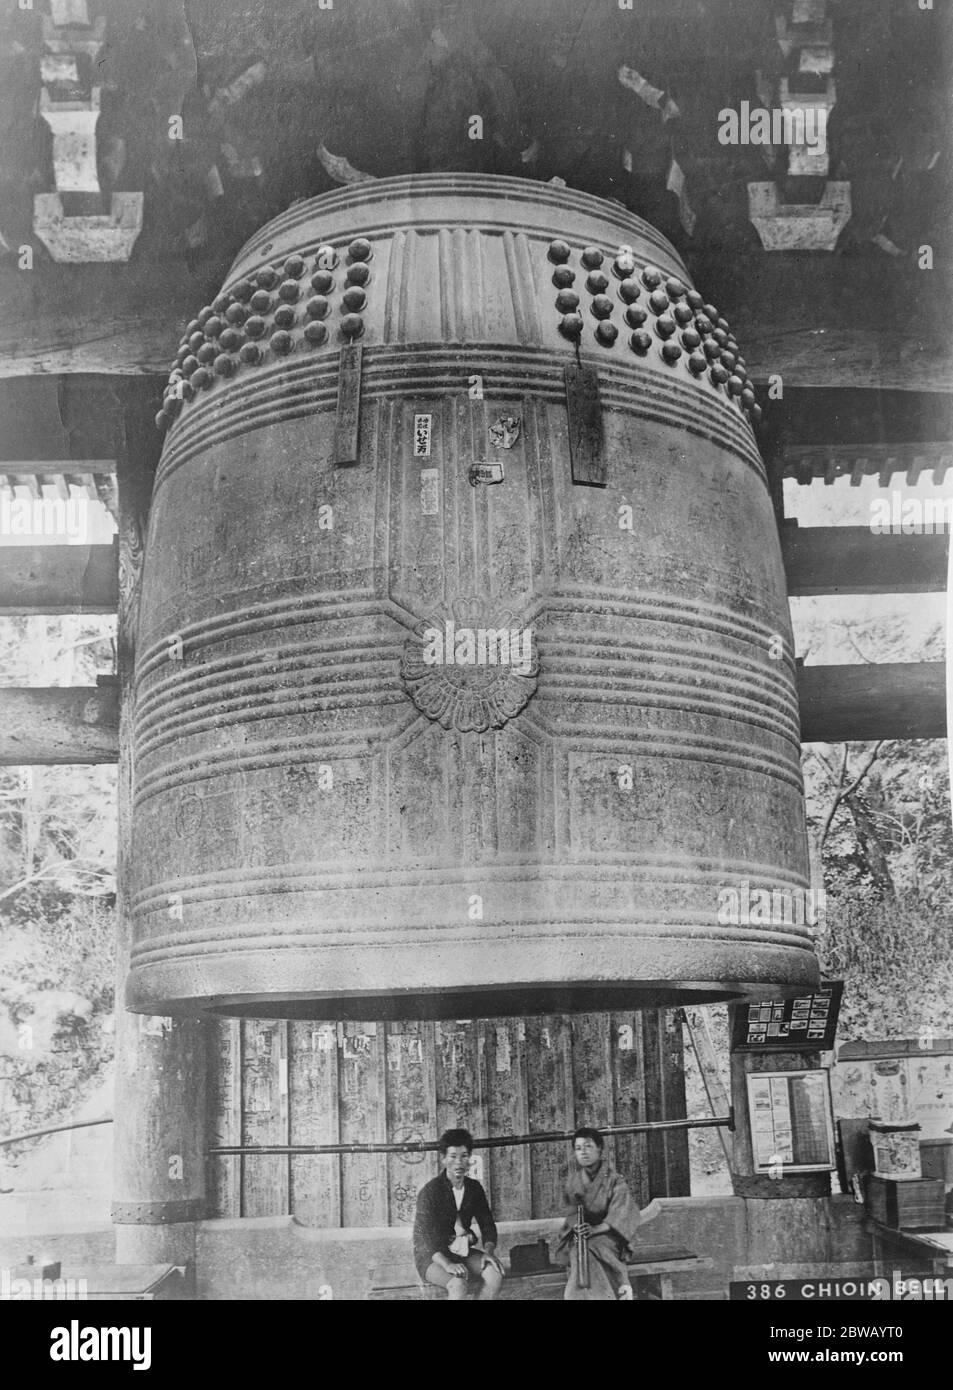 Kioto / Kyoto . The largest suspended bell in the world Hanging in the grounds of the Chion in Temple it weighs 63 tons and is 14 feet in height and 9 feet in diameter 20 April 1922 Stock Photo